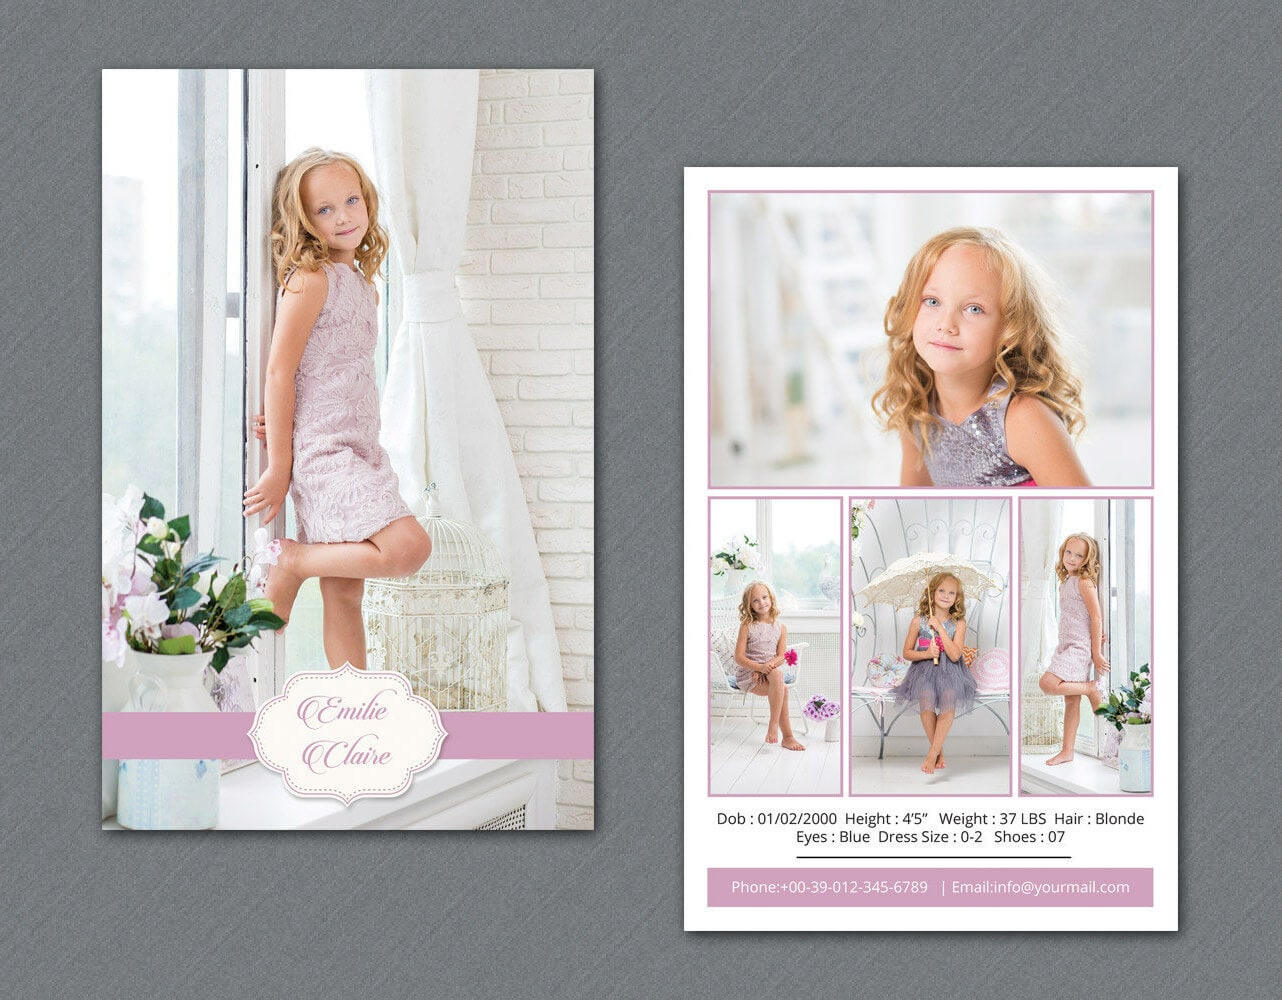 Comp Card Templates ] – On Sale Model Comp Card Photoshop With Zed Card Template Free